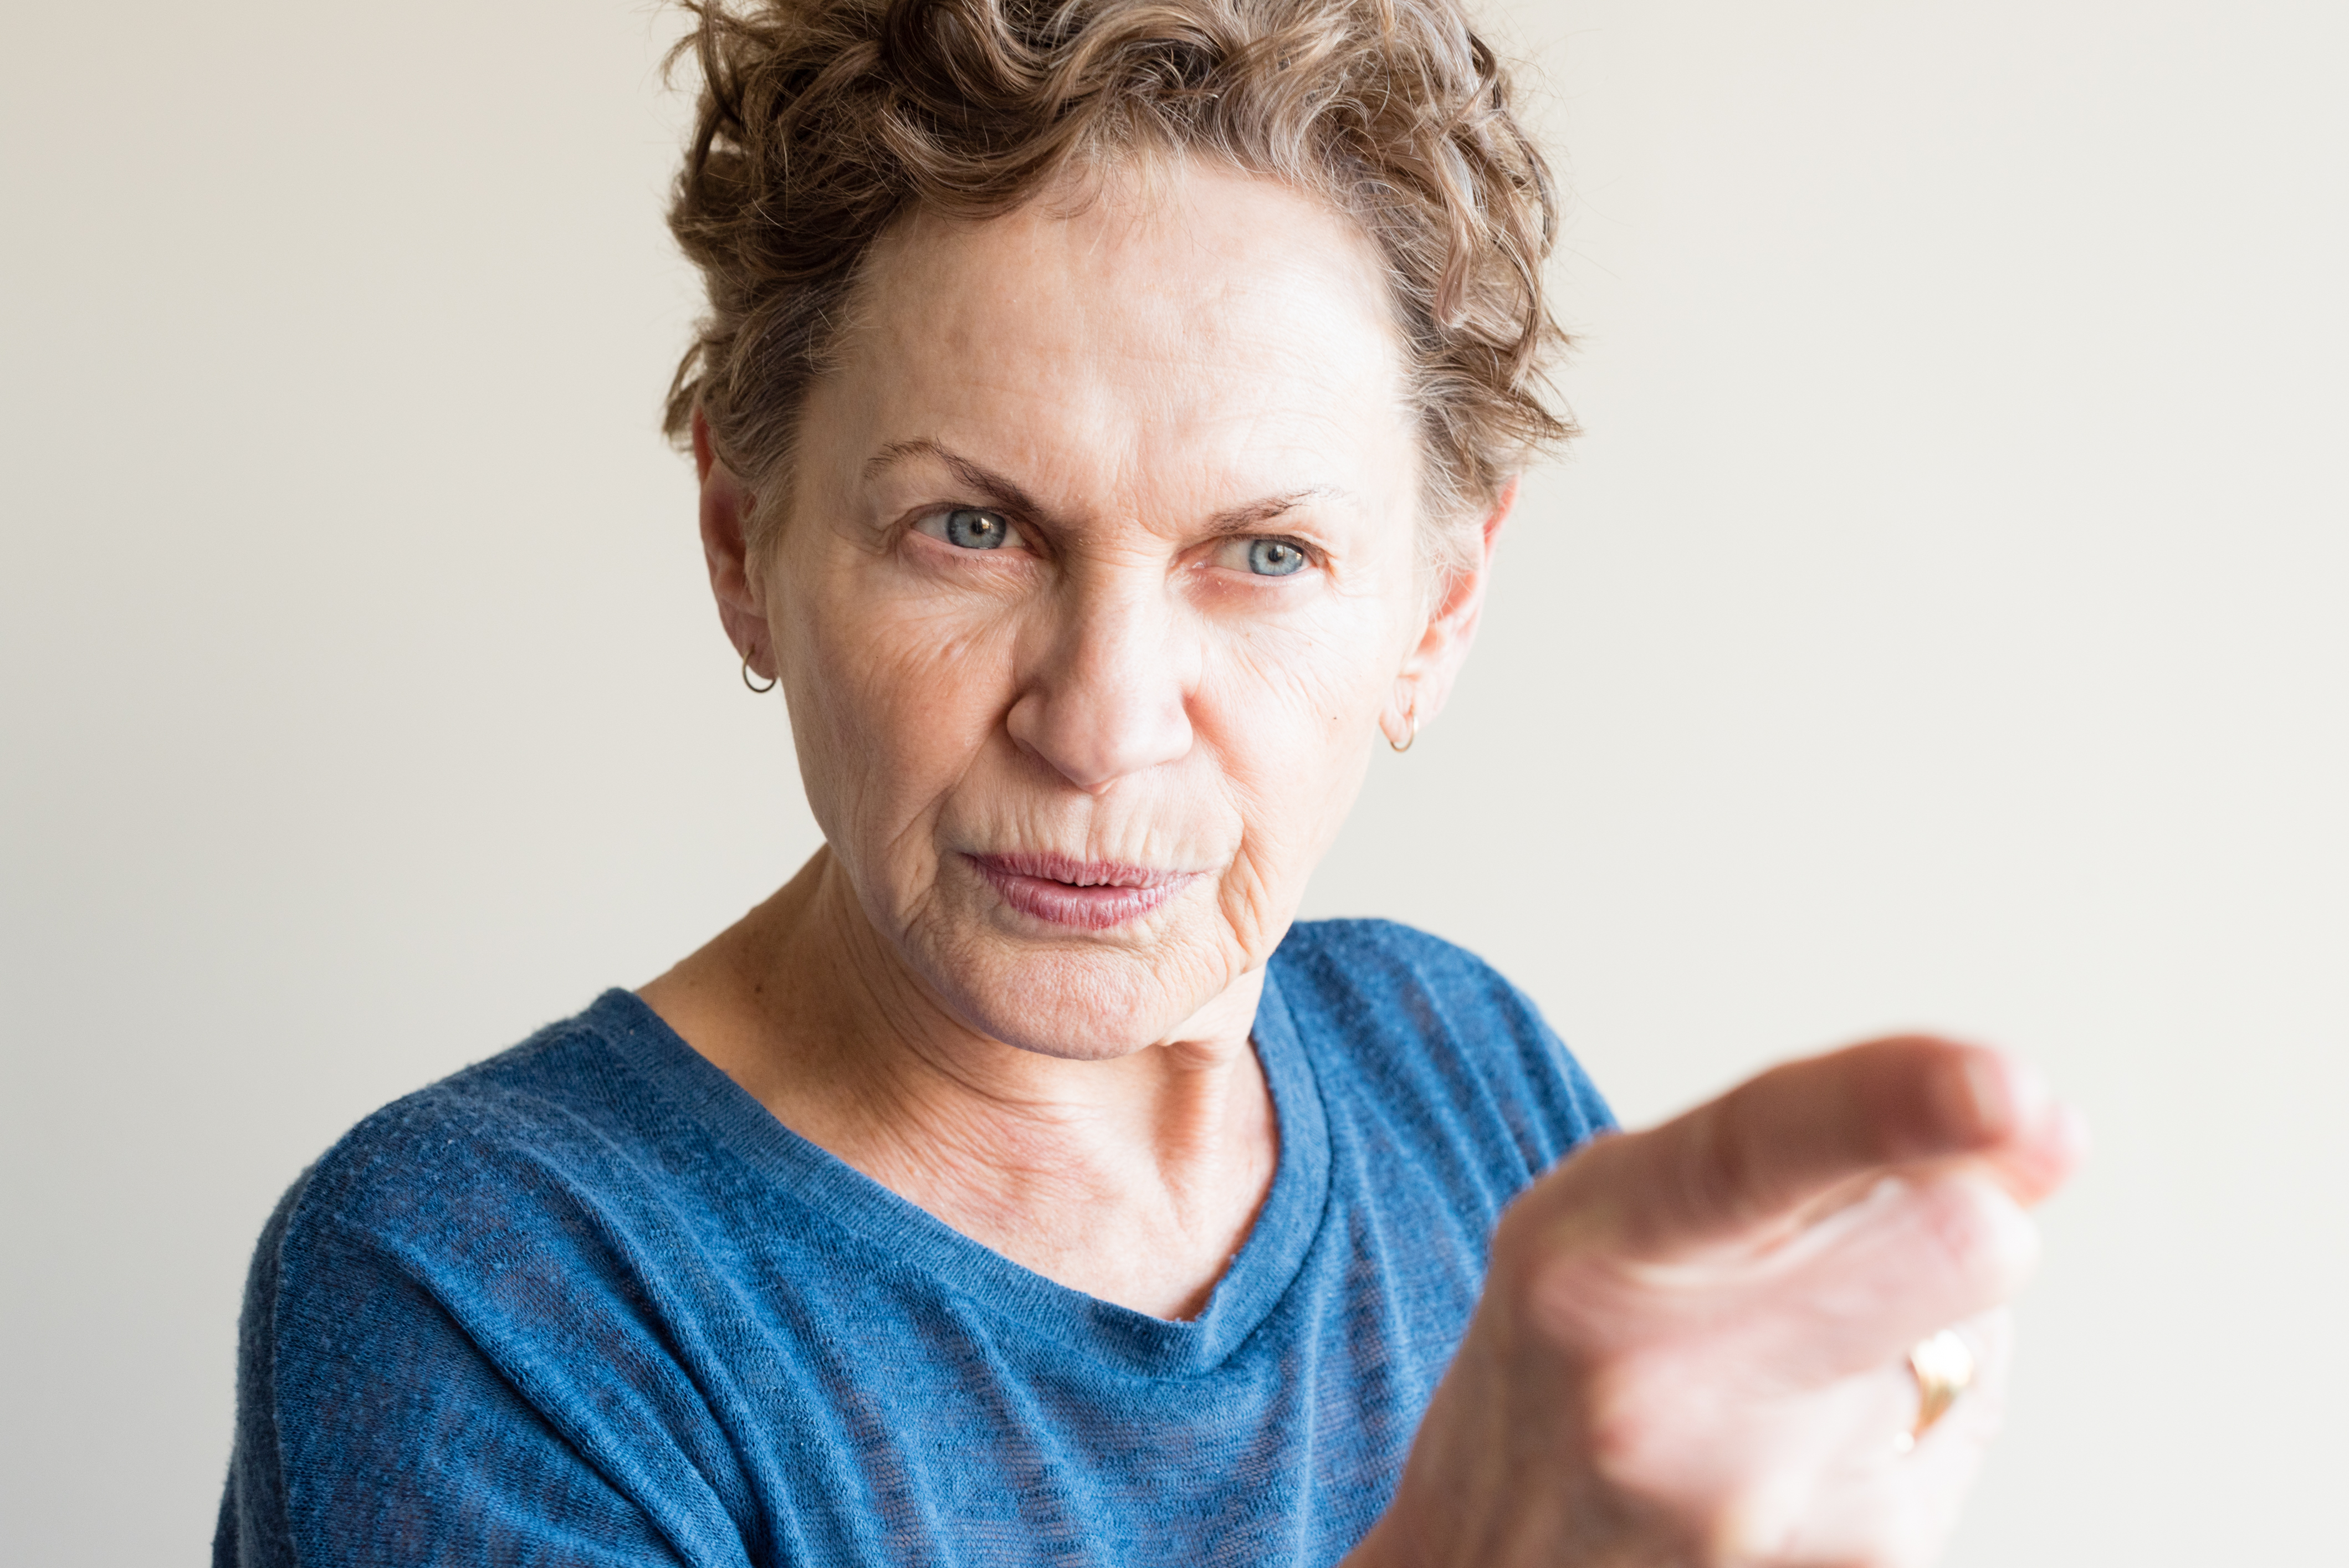 An elderly woman pointing her finger in anger | Source: Shutterstock